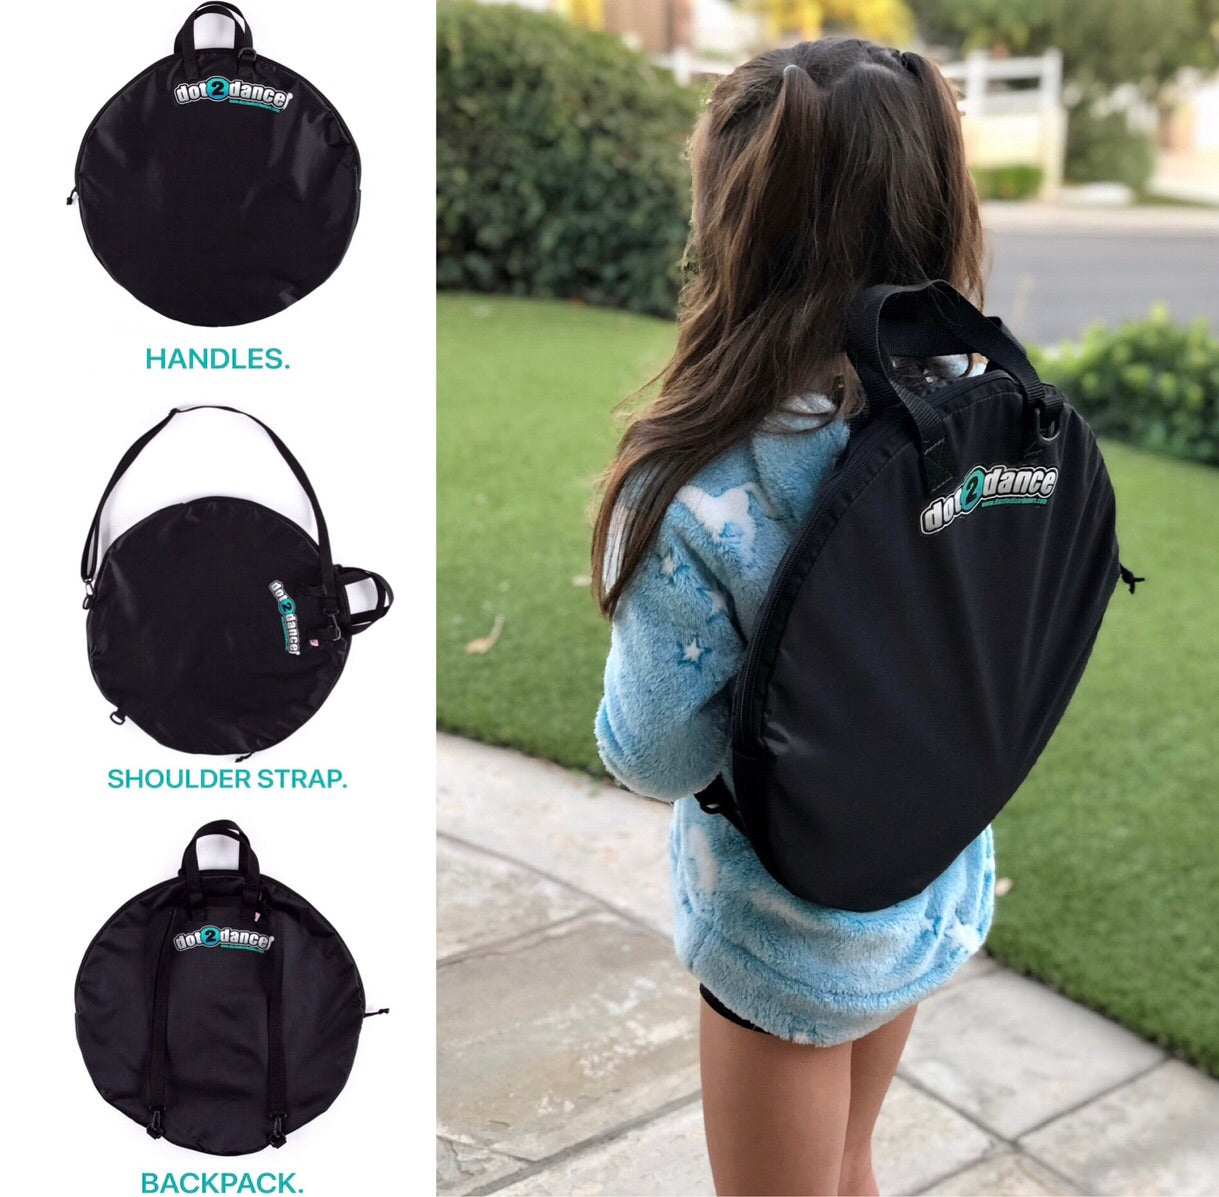 dot2dance Travel Tote Bag,3-in-1 Converting Backpack, Carry Case, Shou –  Dazzle Distributors-Home of dot2dance PORTABLE DANCE FLOOR